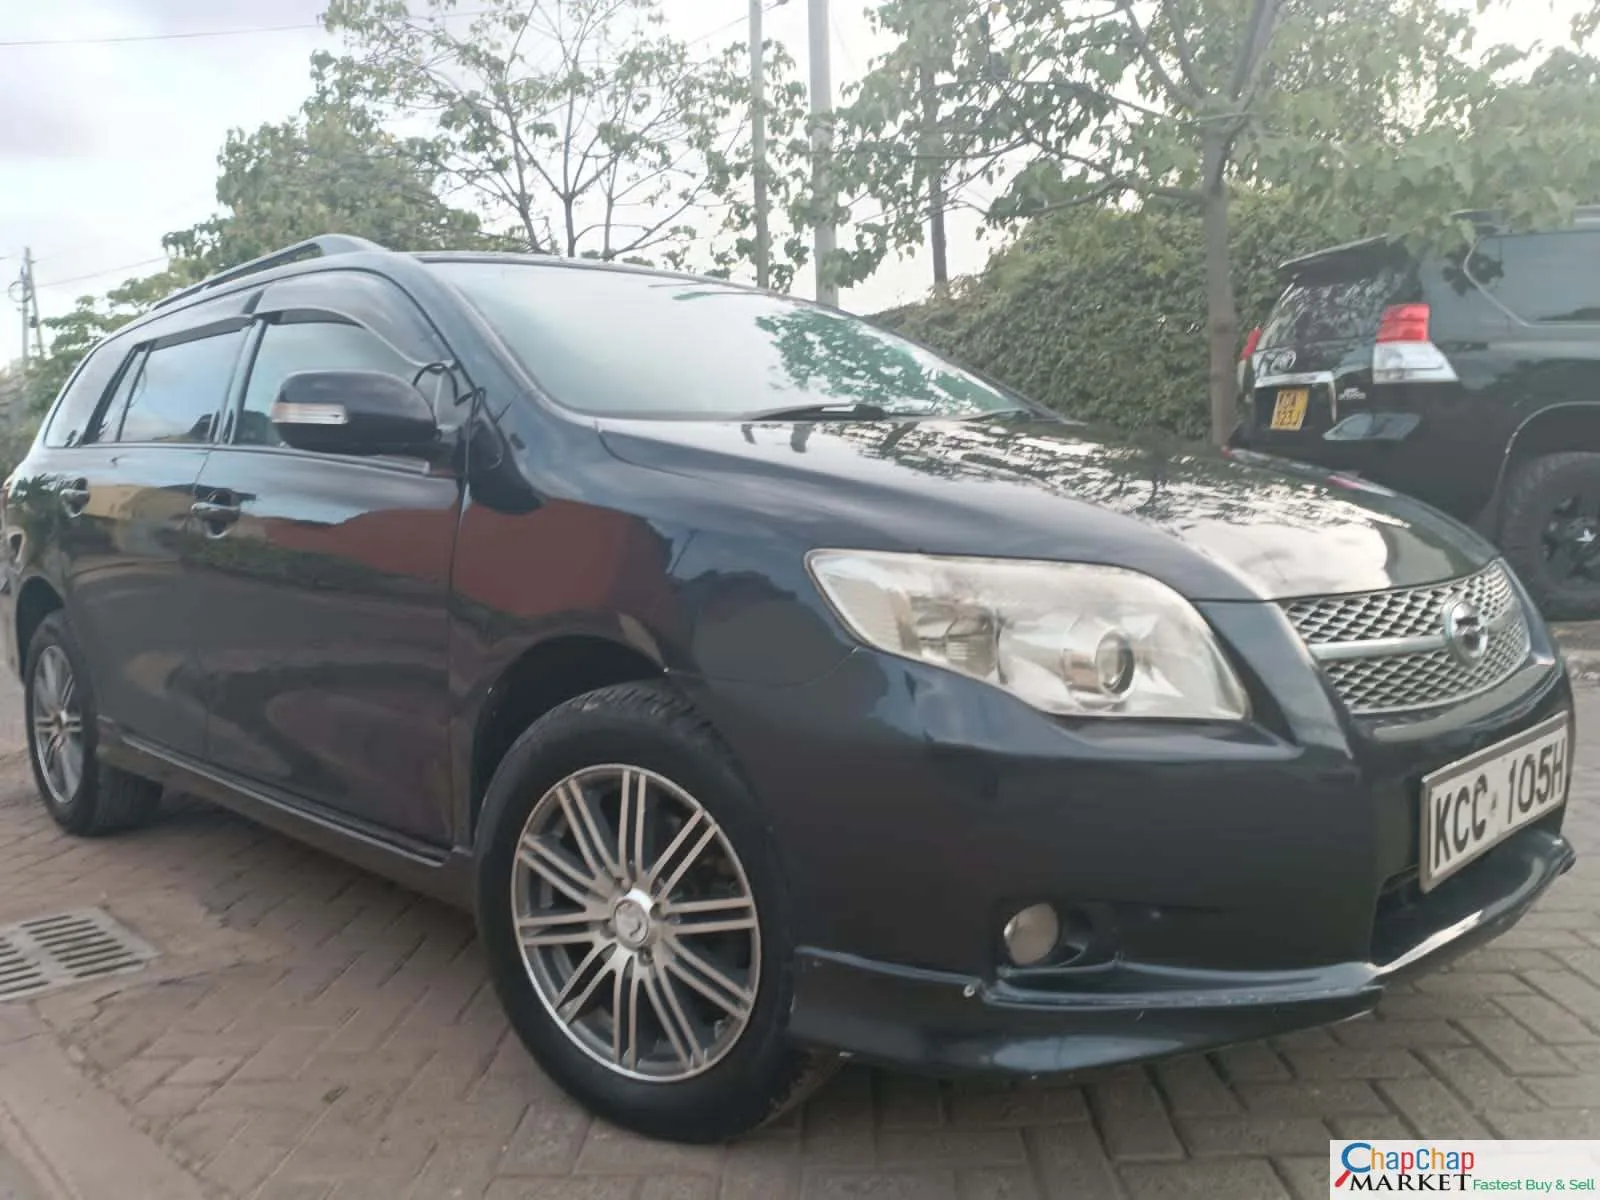 Cars Cars For Sale/Vehicles-Toyota fielder You Pay 30% Deposit INSTALLMENTS Trade in OK Wow 9